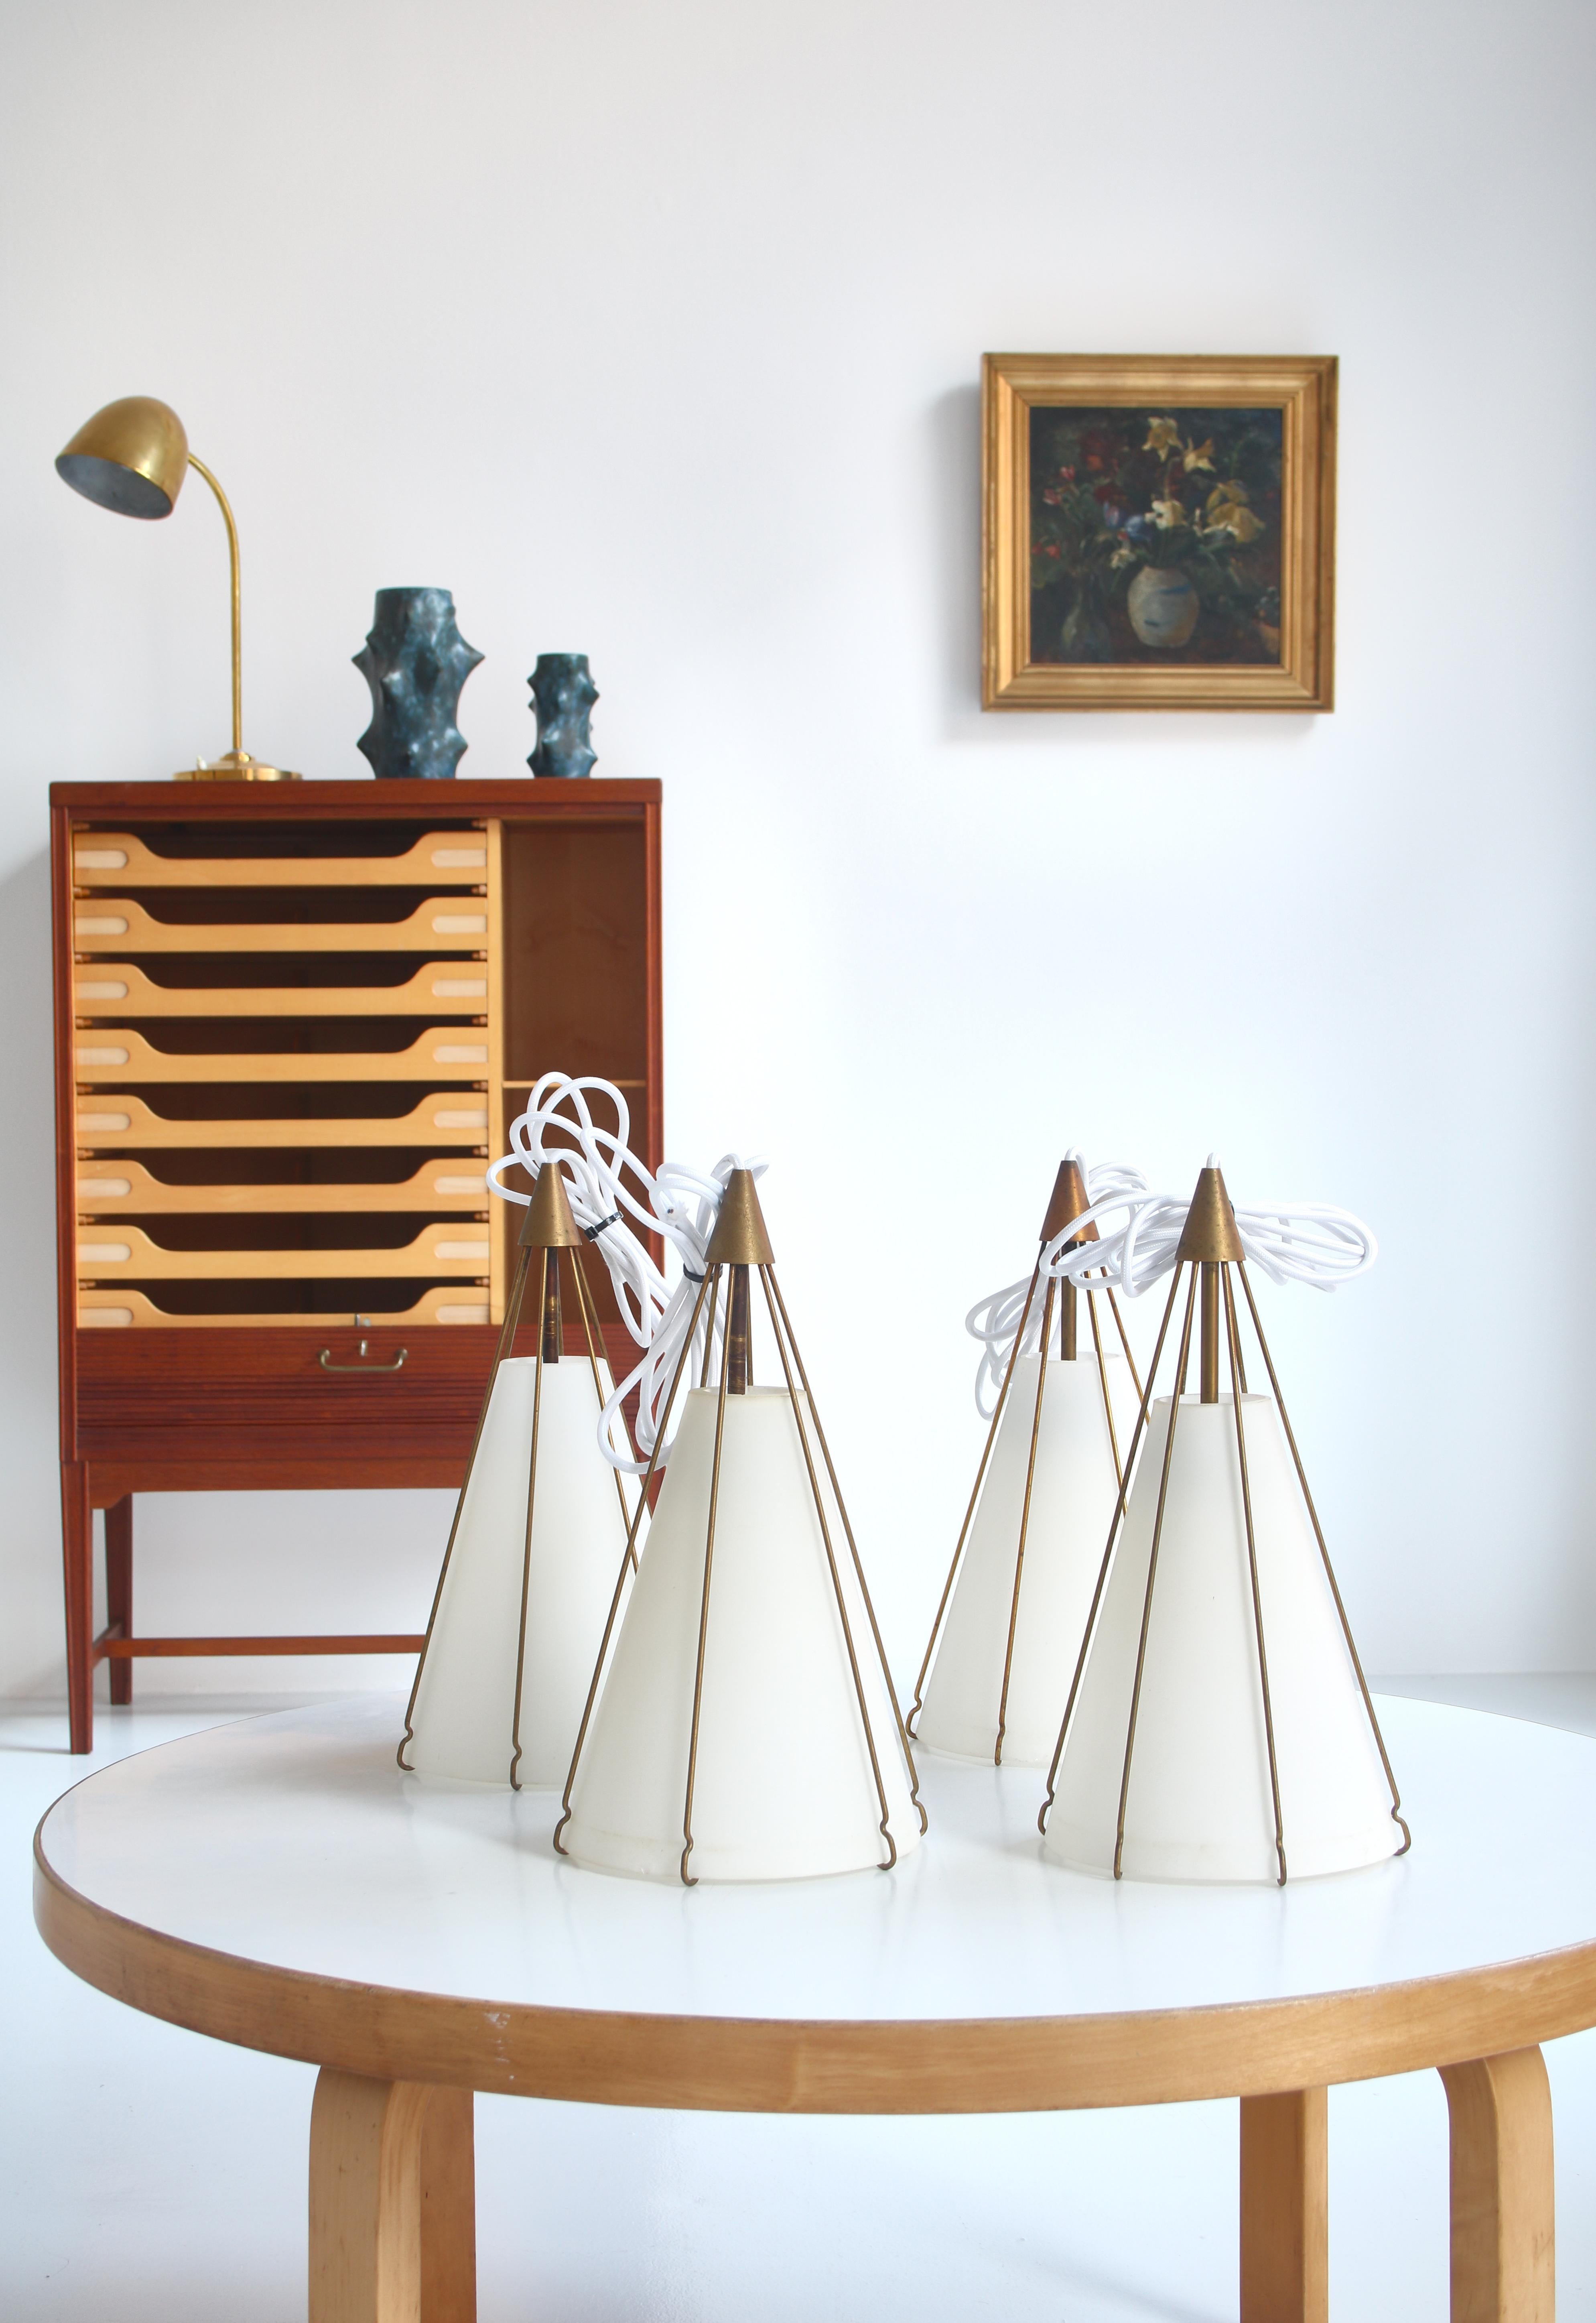 Rare pendant lamp designed by Bent Karlby in the early 1950s for lightning company LYFA, Denmark. Cone shaped opaline shades and brass mounts. Good original condition.